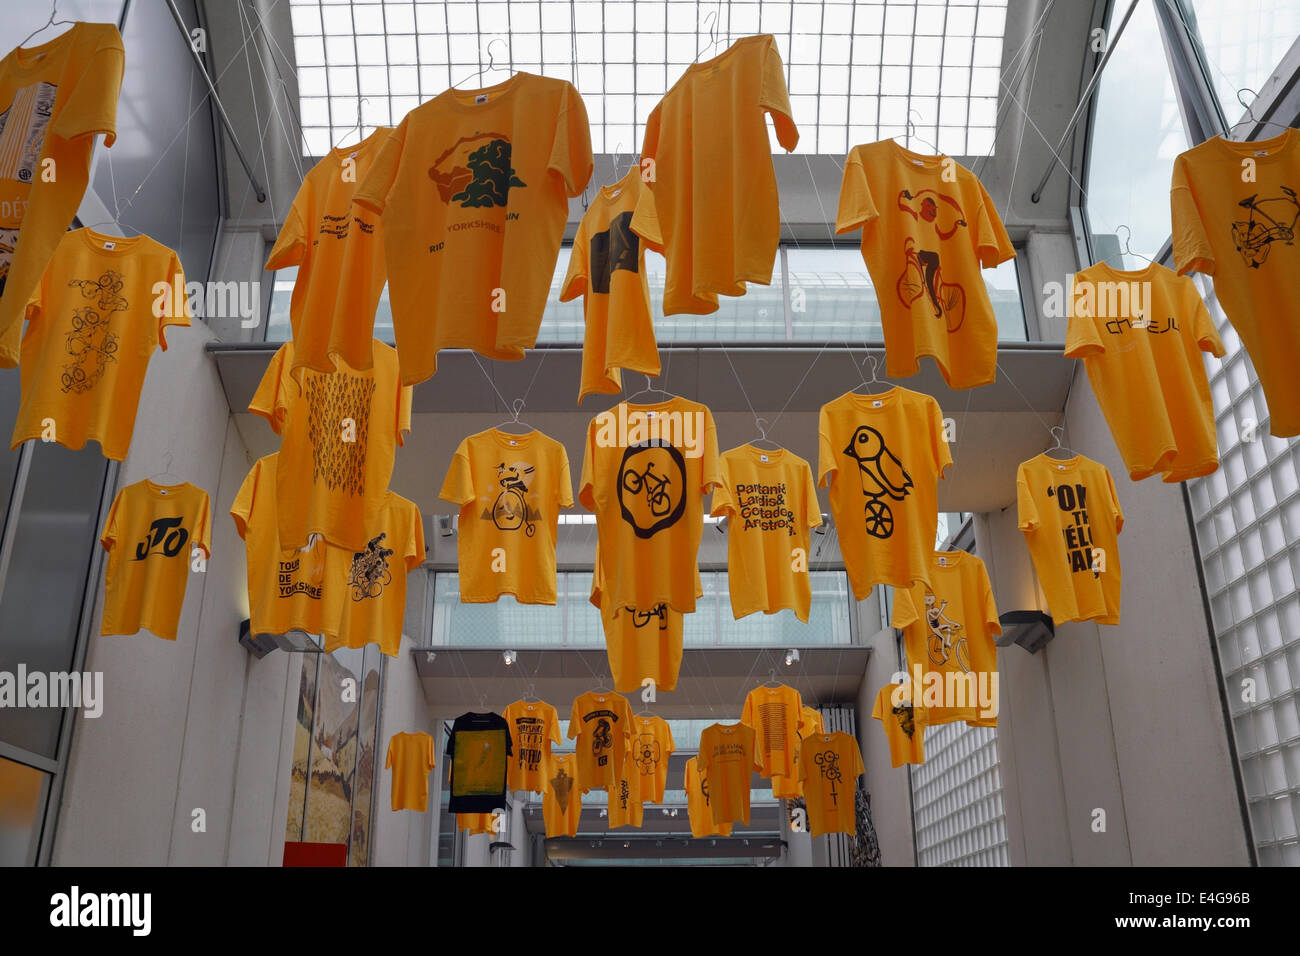 Yorkshire in Yellow, T Shirts Exhibit at the Sheffield Millennium Galleries England UK, mostra d'arte sul tour de france in visita allo Yorkshire Foto Stock